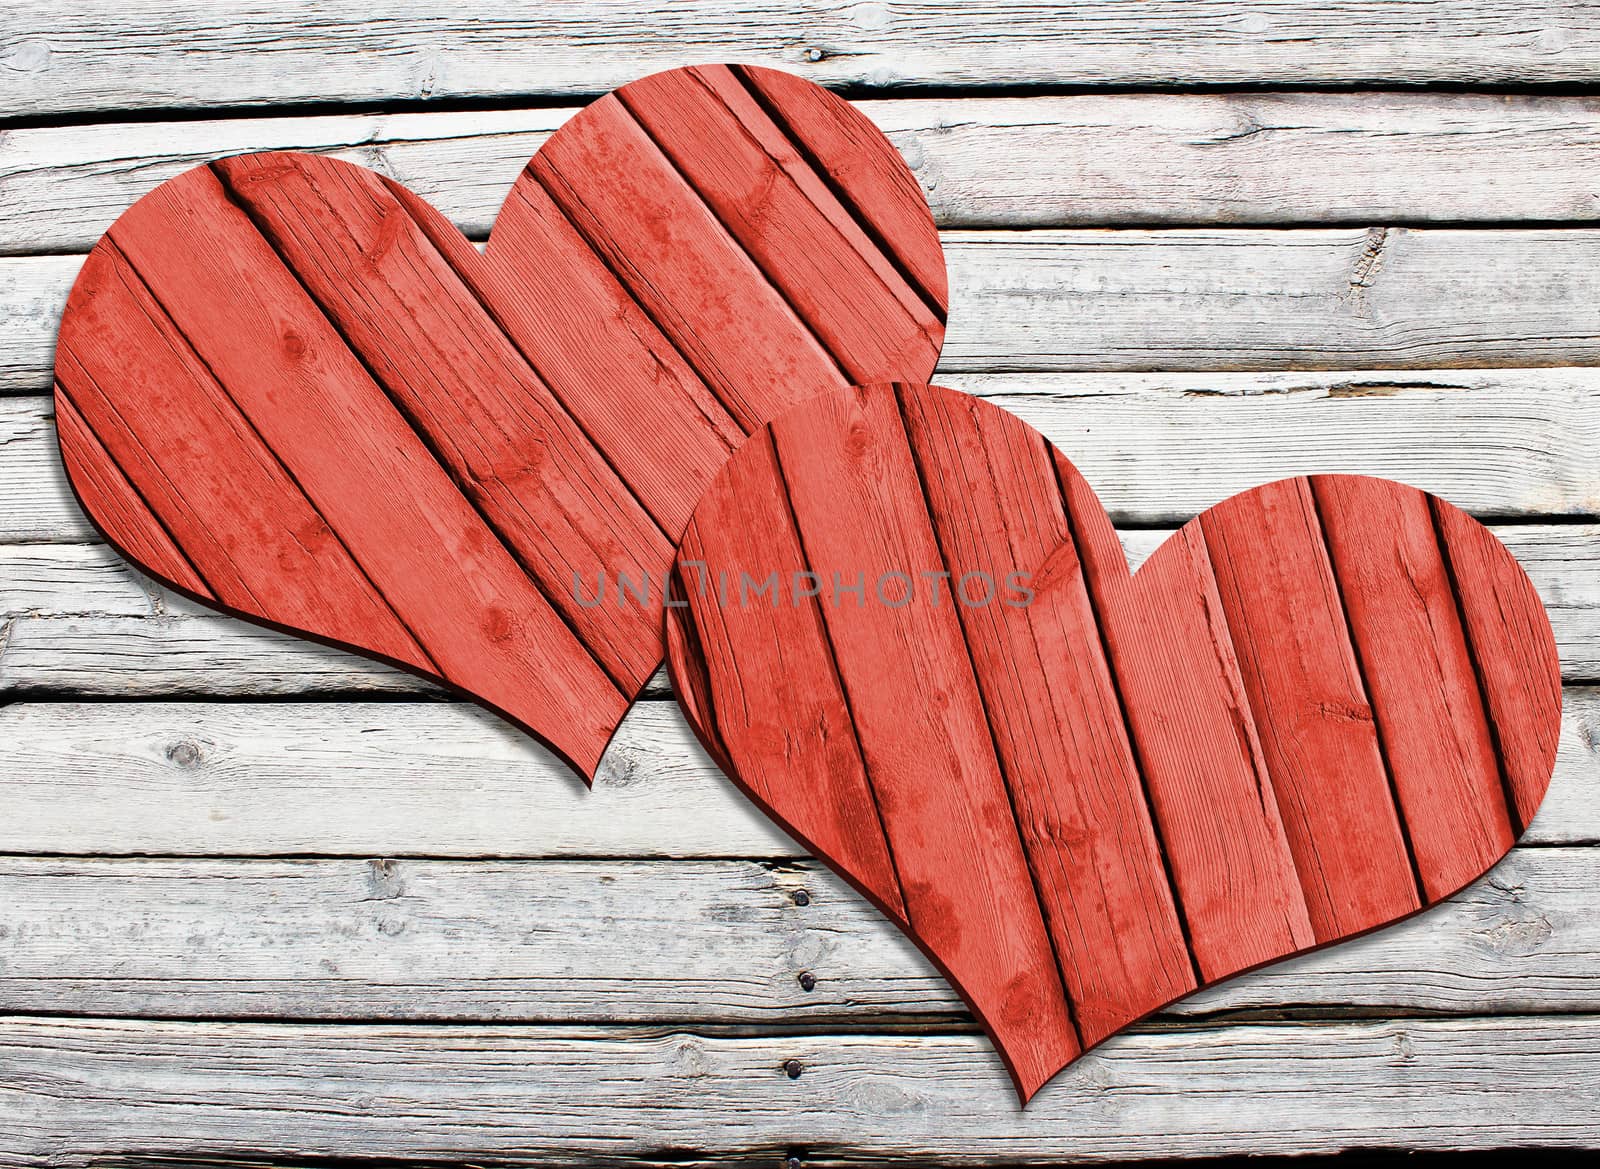 Two heart carved on a wooden surface. The concept of Valentine's Day